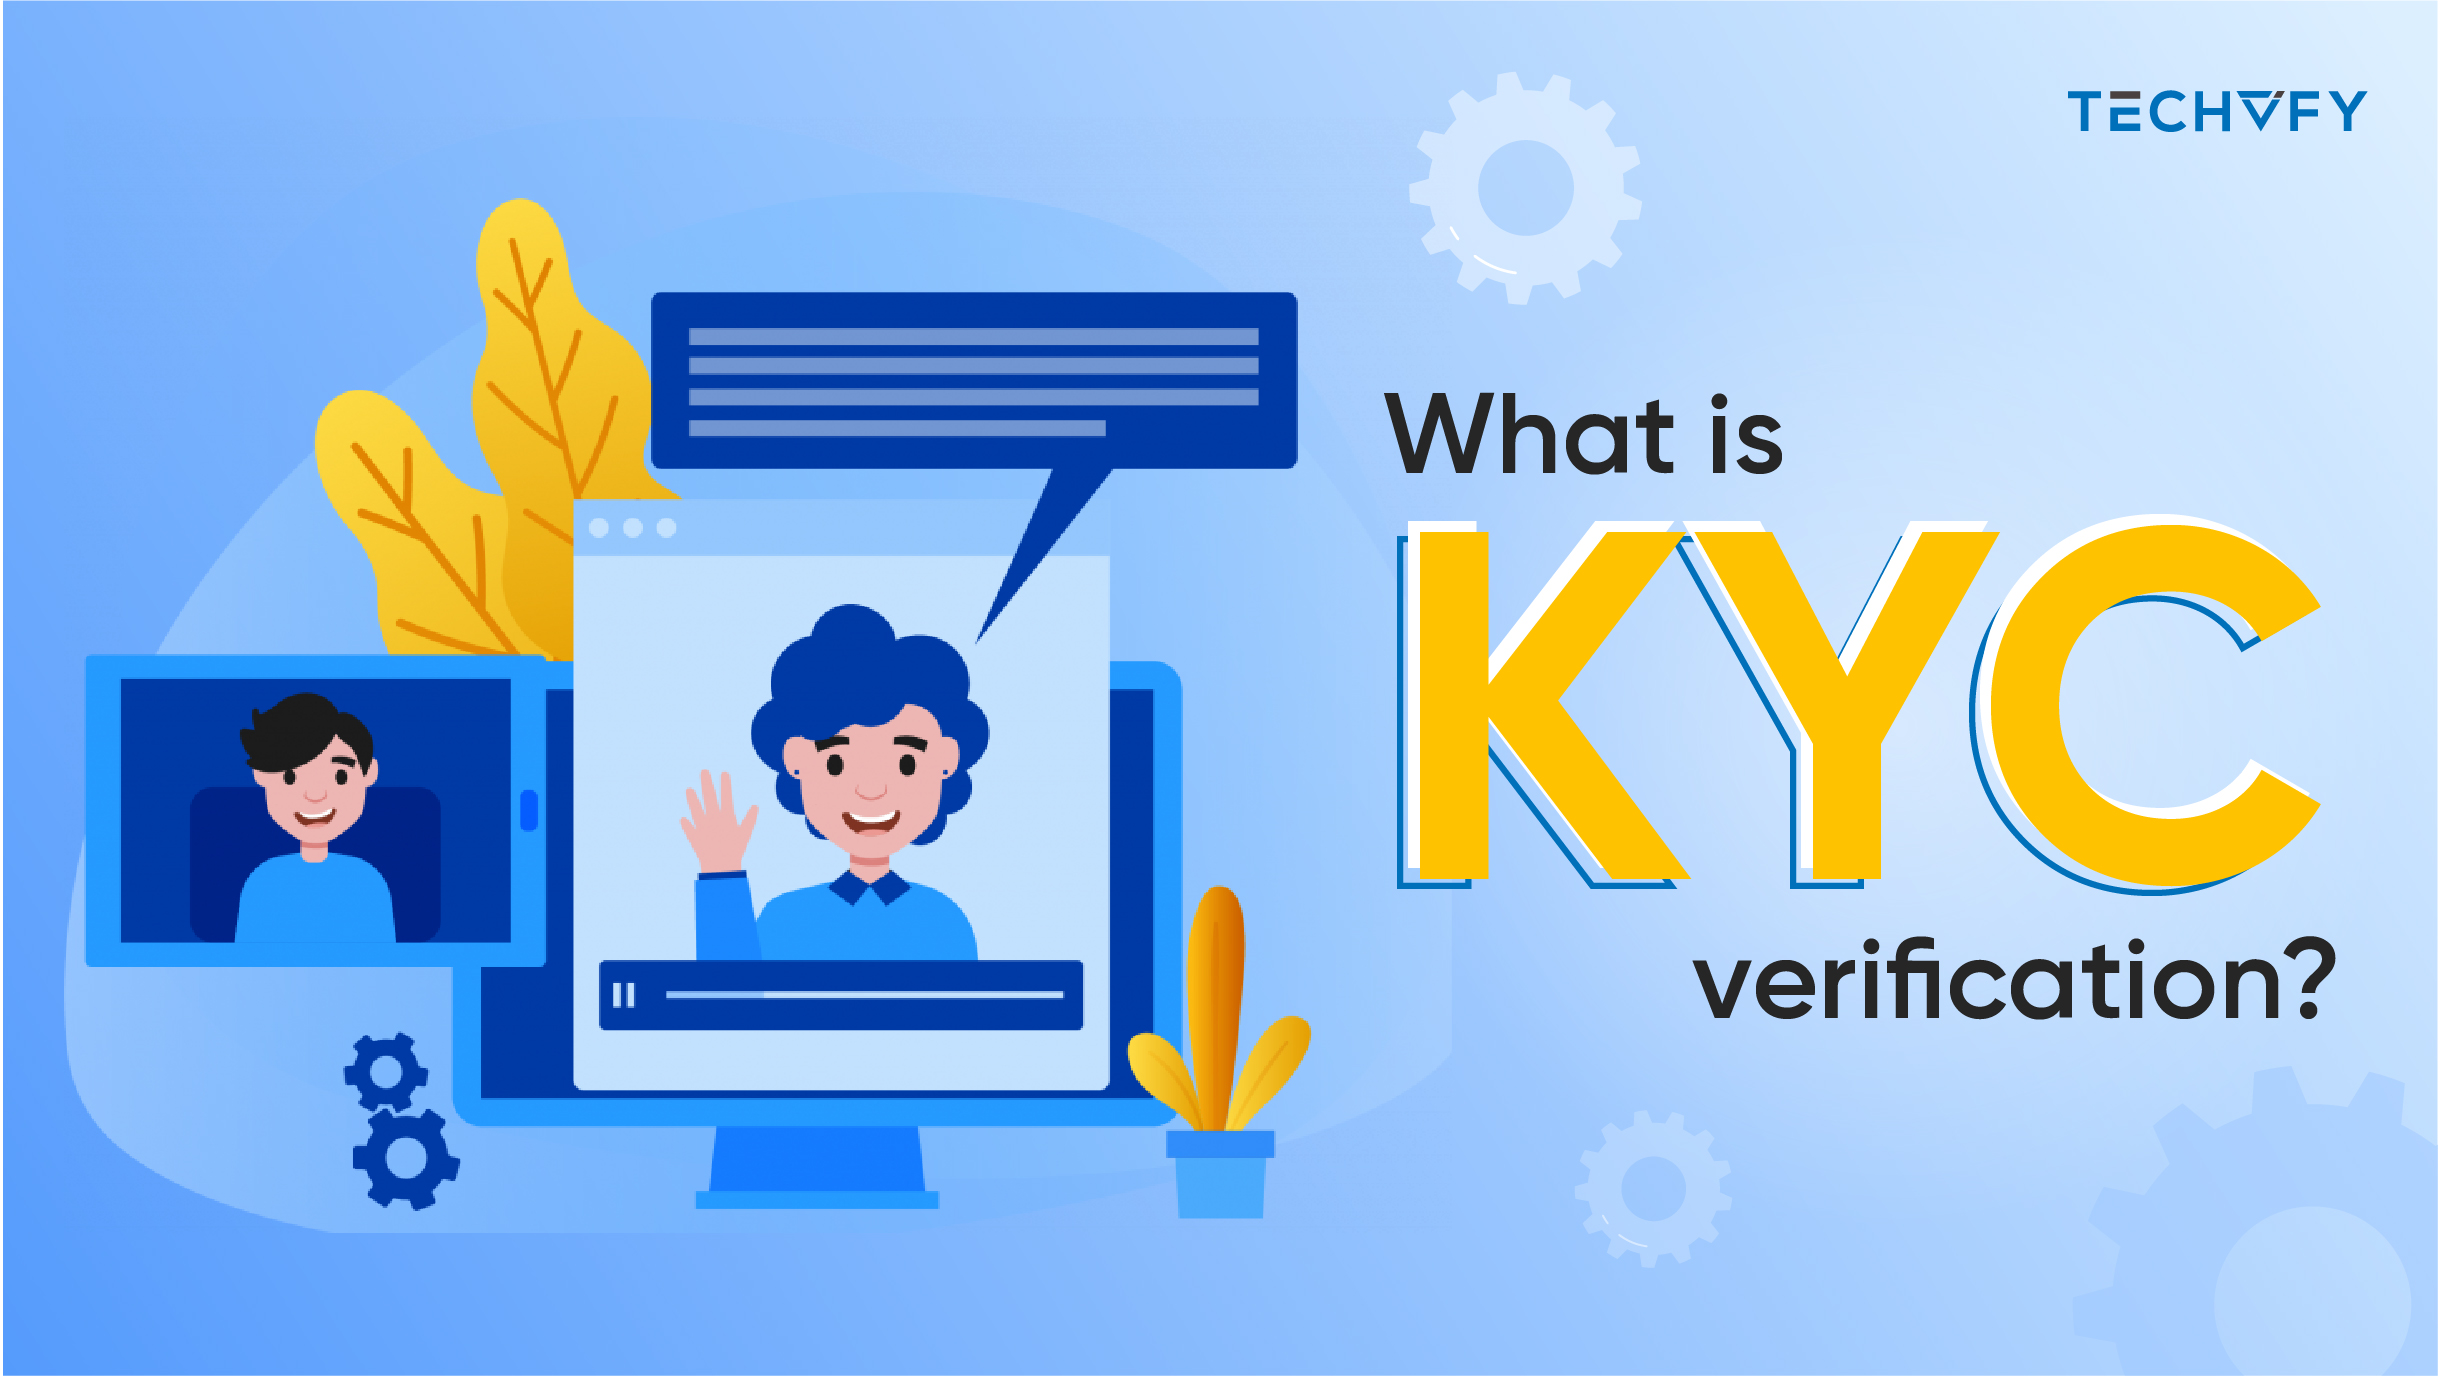 What is KYC verification?